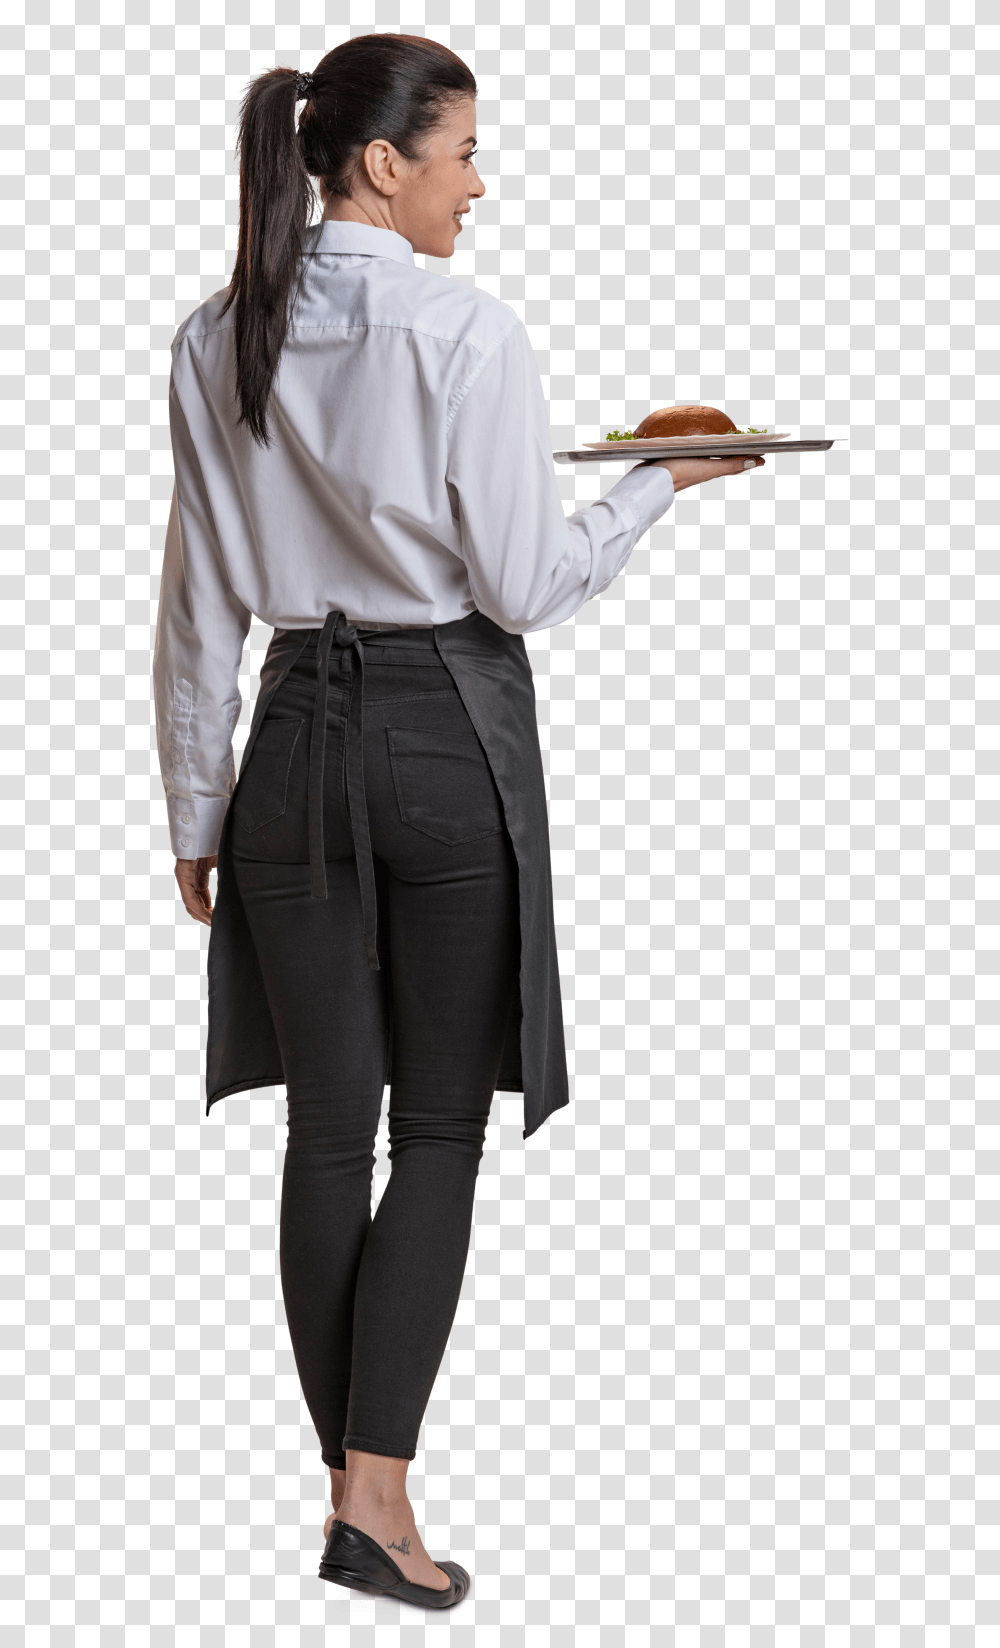 Cut Out Woman Waitress With Foow Professions And Services Waiter, Apparel, Shirt, Person Transparent Png